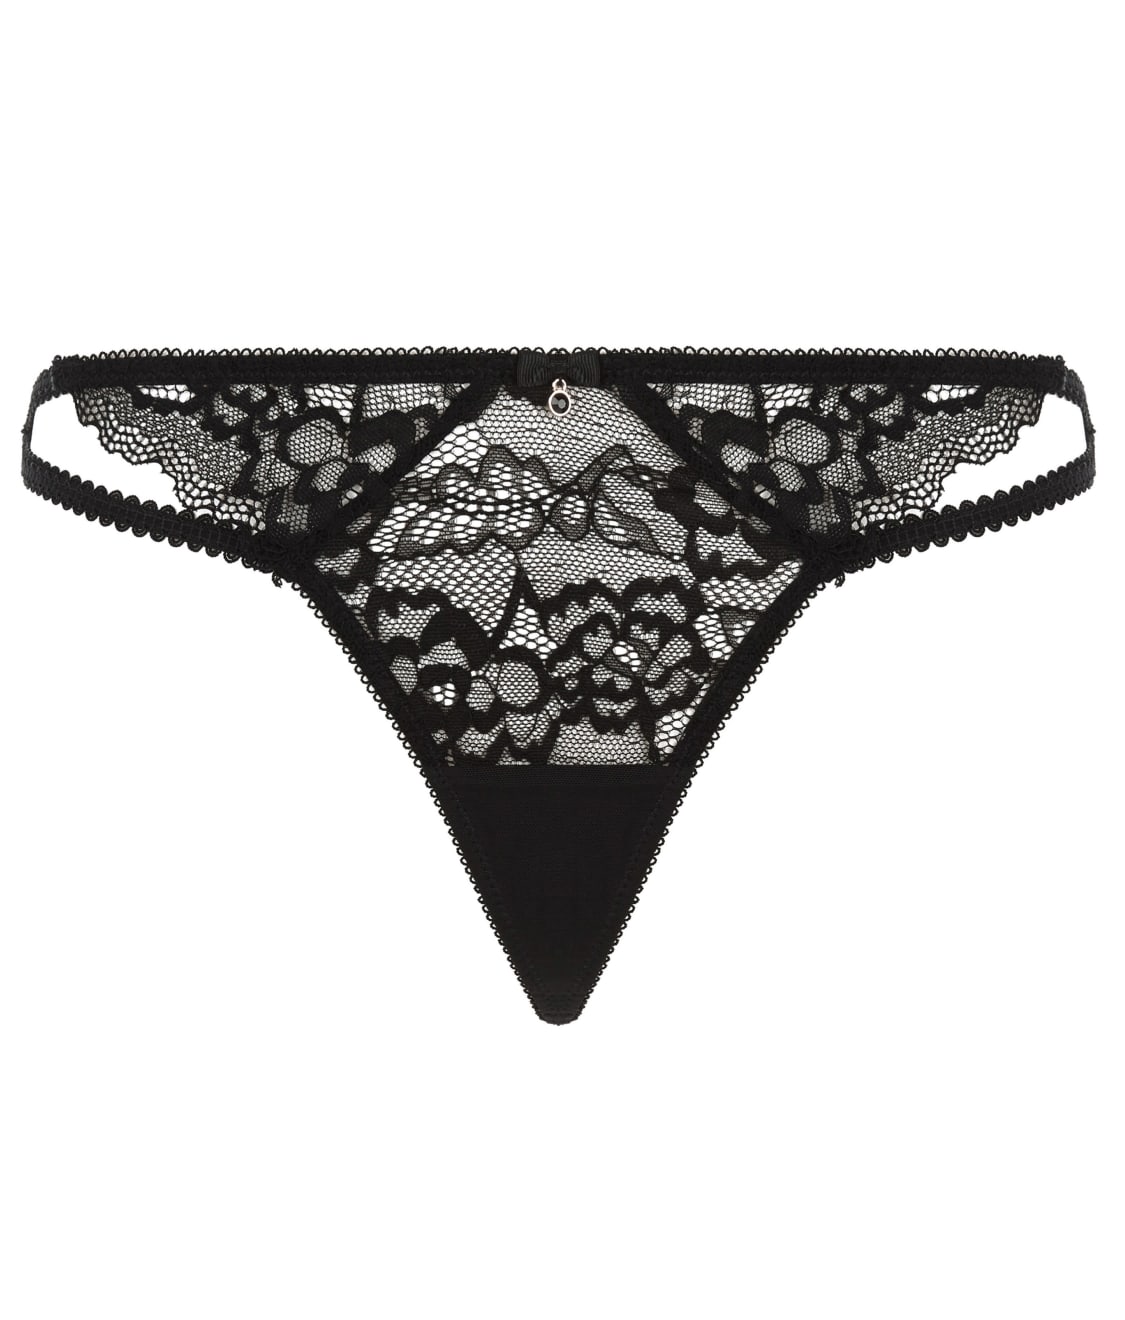 Ann Summers Sexy Lace String Thong & Reviews | Bare Necessities (Style ...